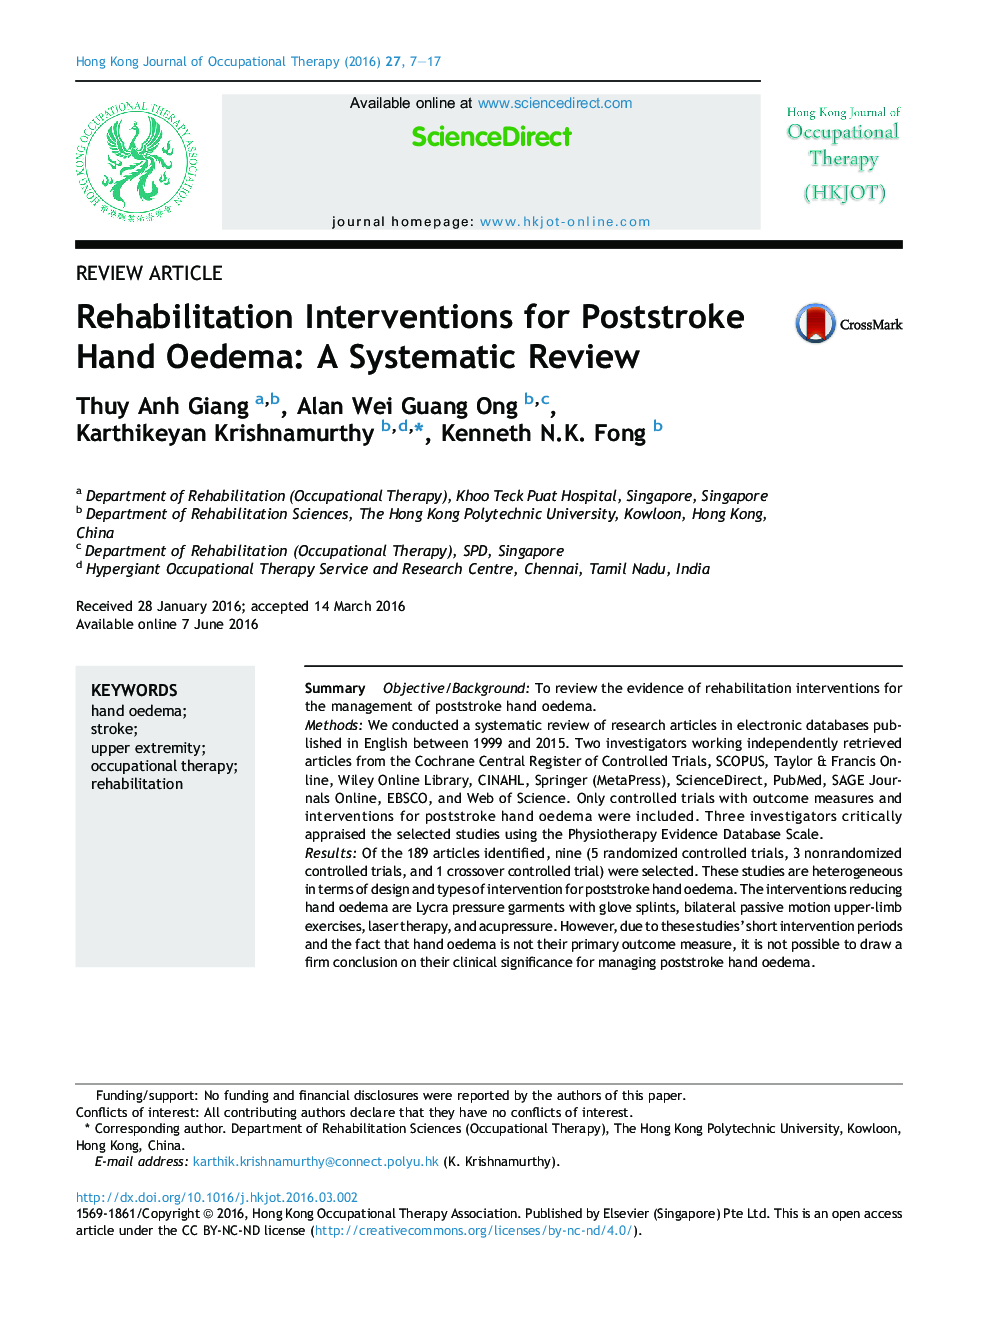 Rehabilitation Interventions for Poststroke Hand Oedema: A Systematic Review 